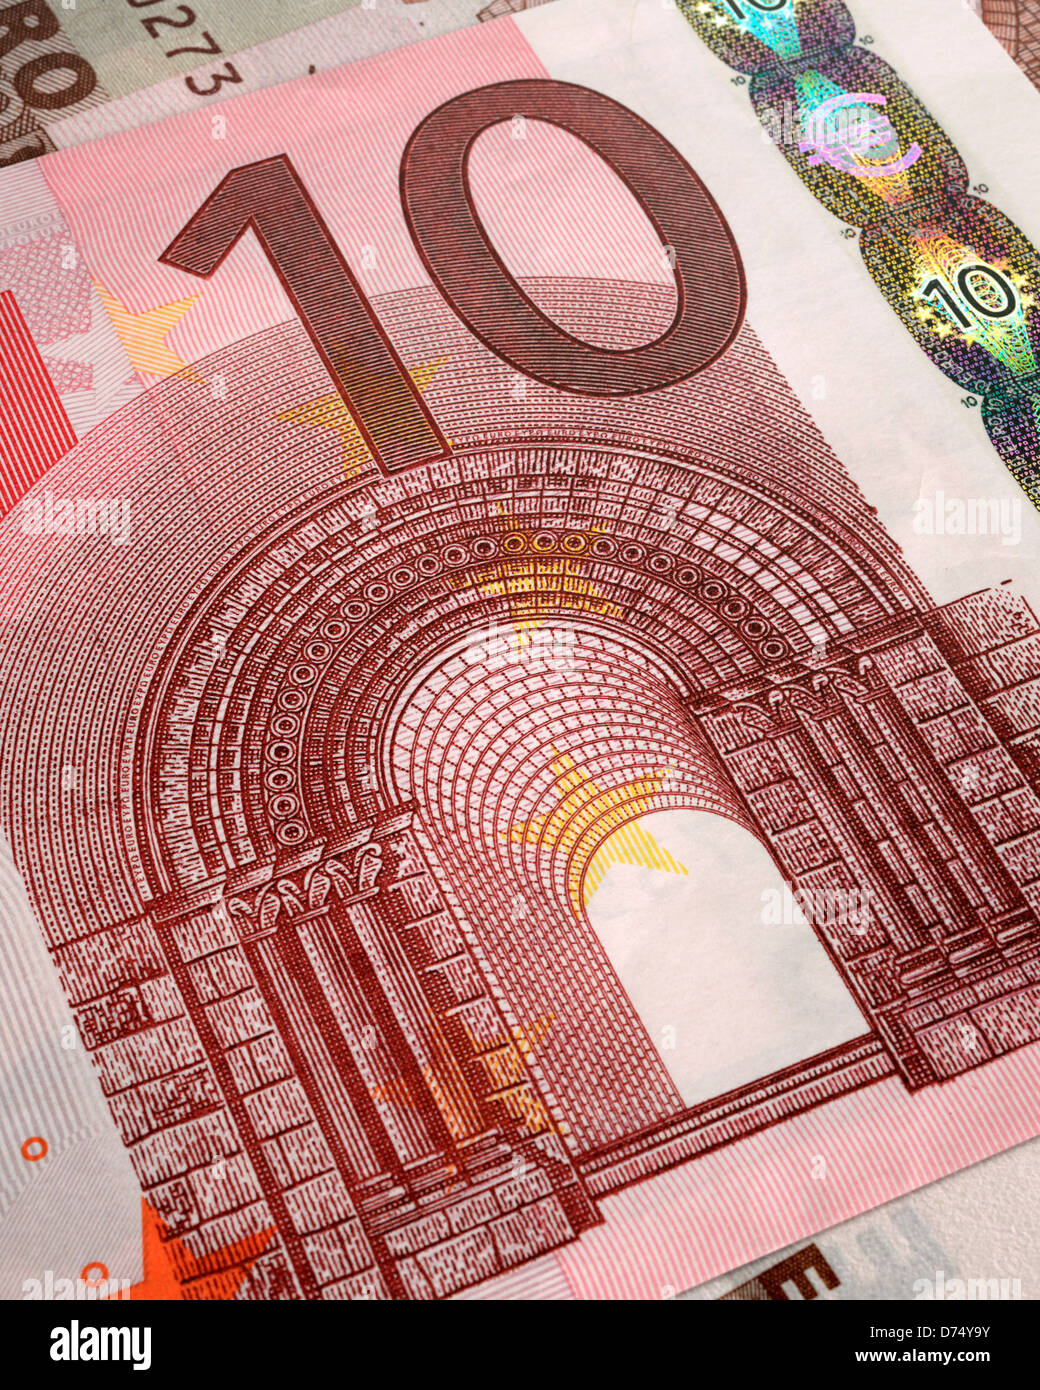 10 euro note close up Stock Photo